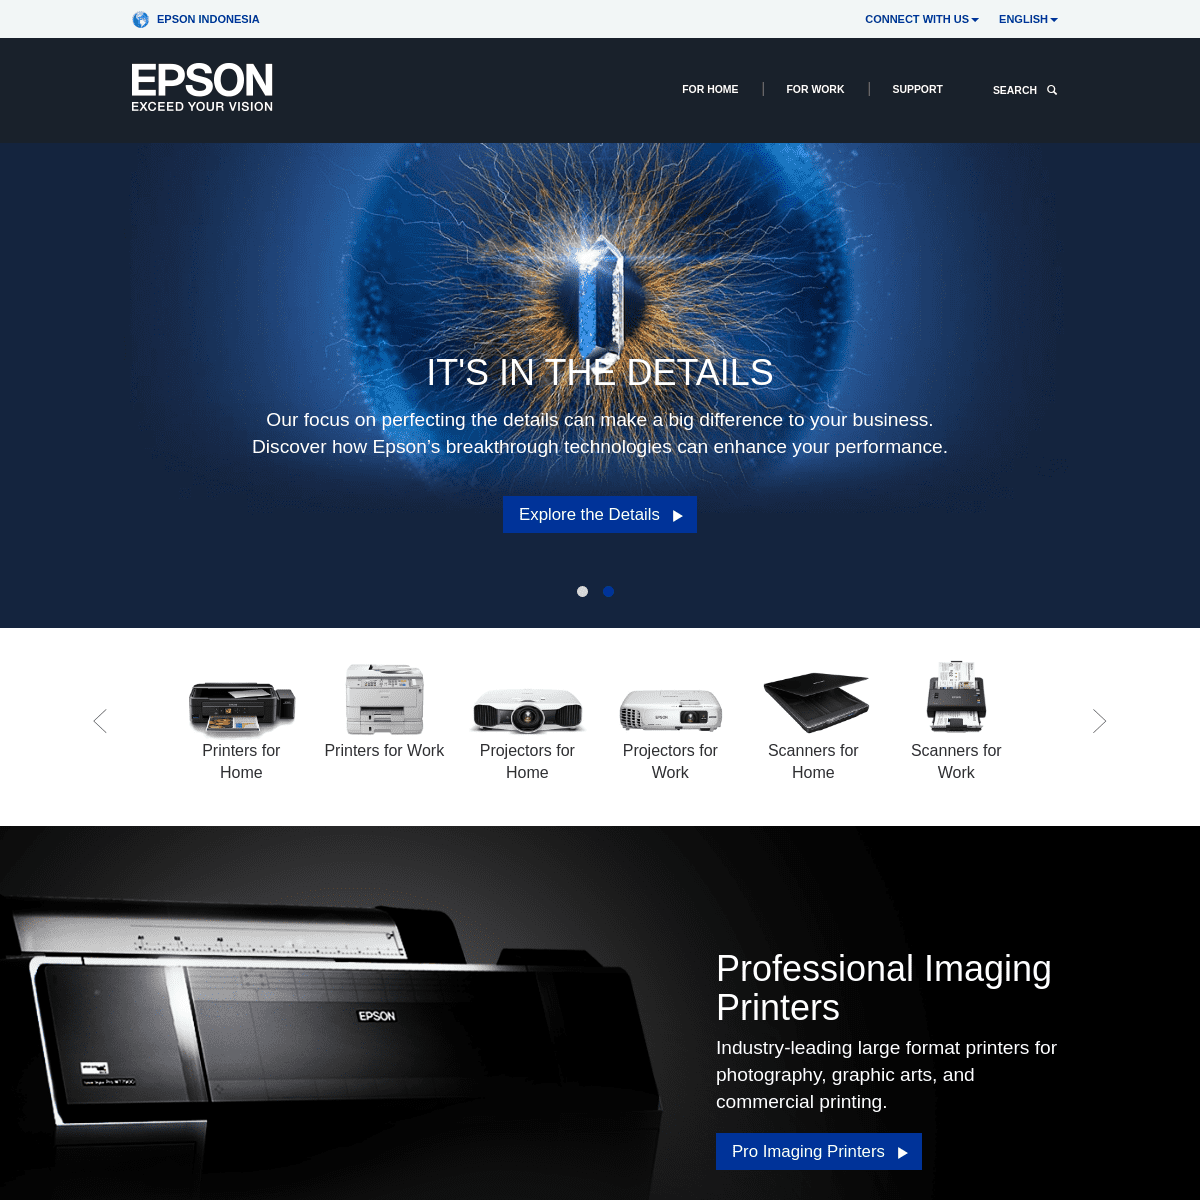 A complete backup of epson.co.id